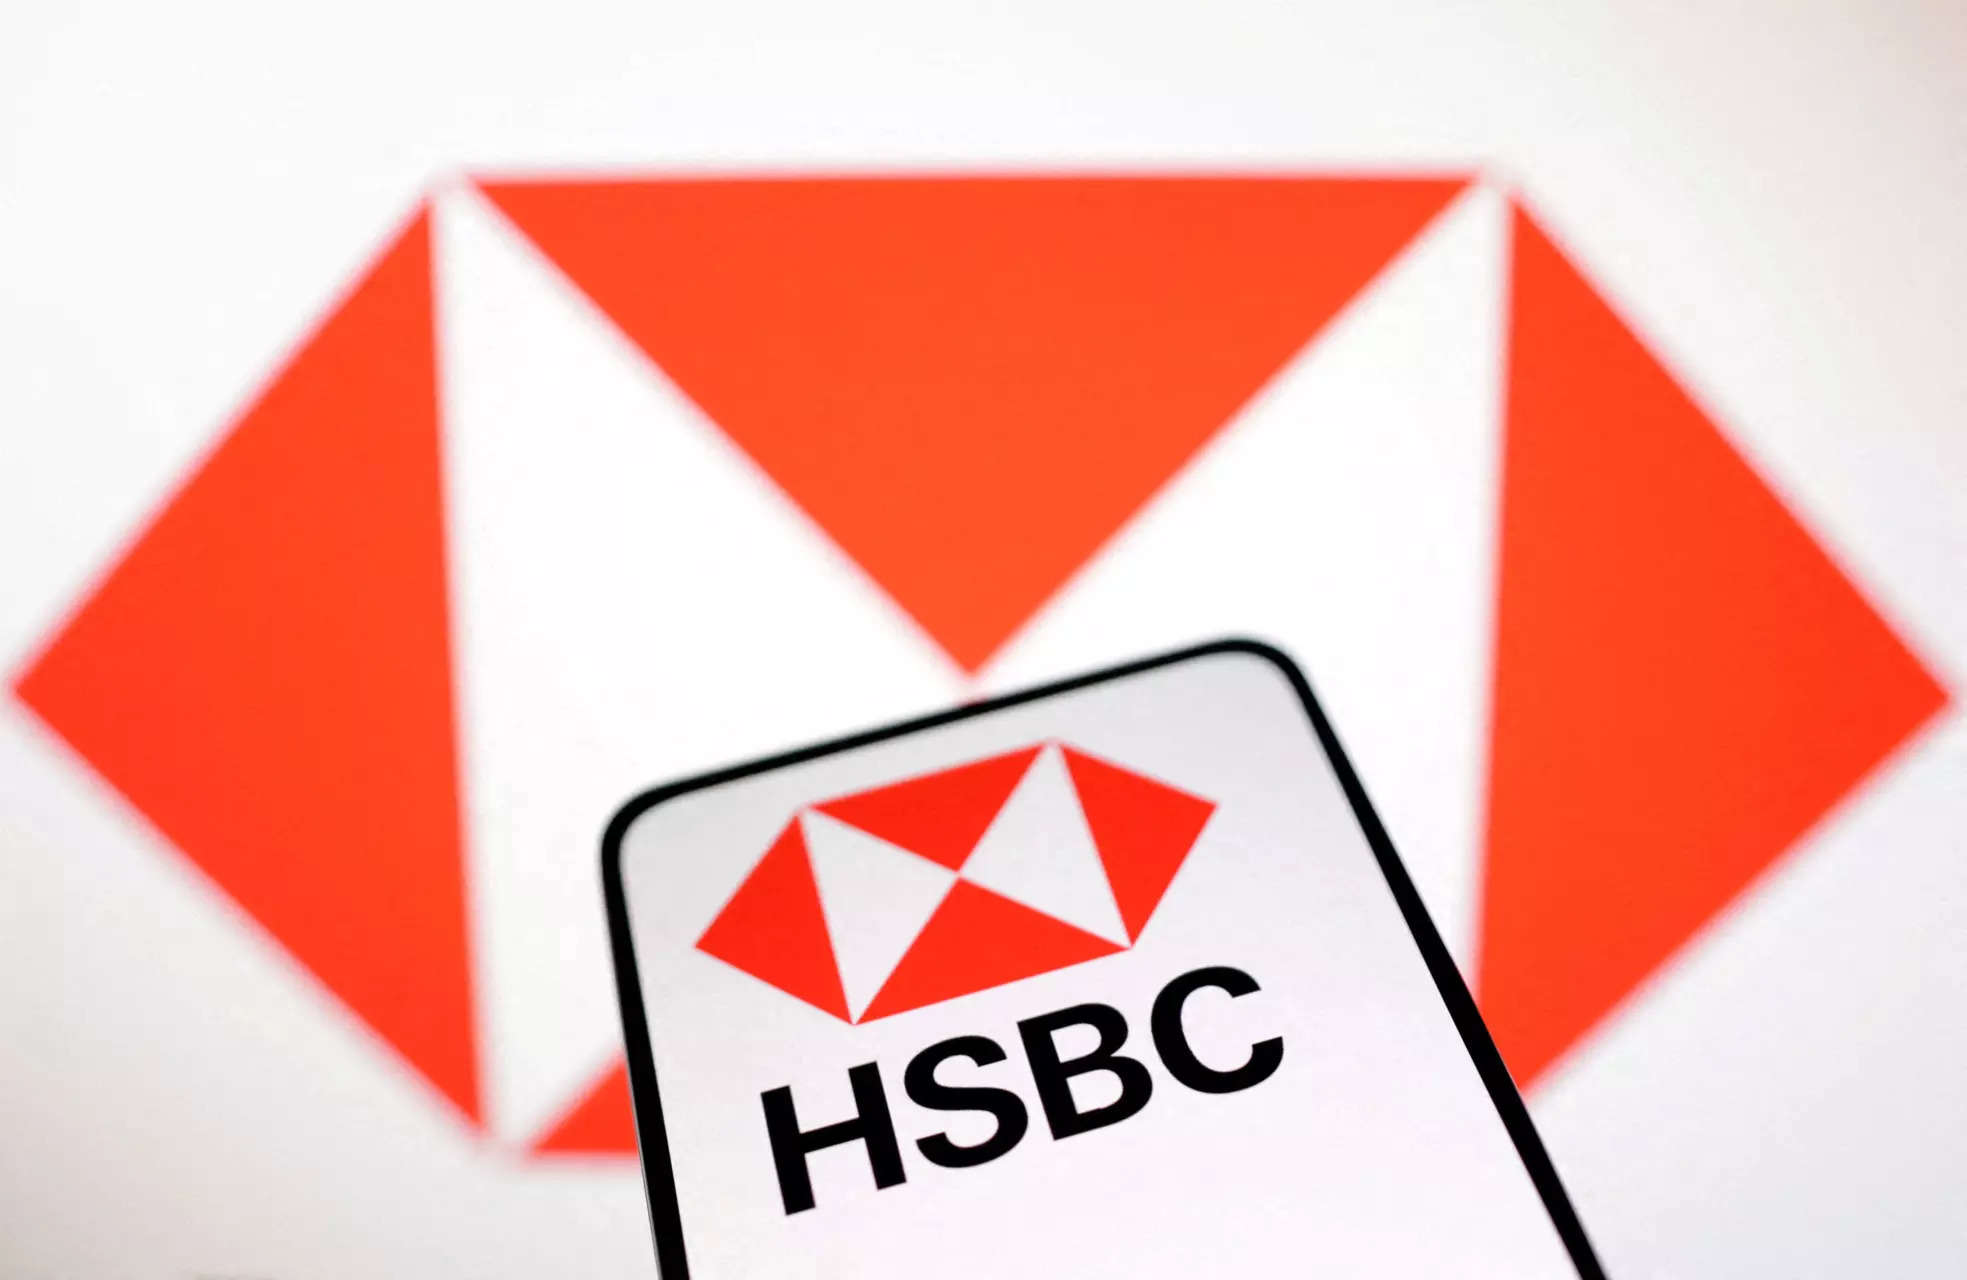 HSBC taps metaverse to win business from India’s rich diaspora 